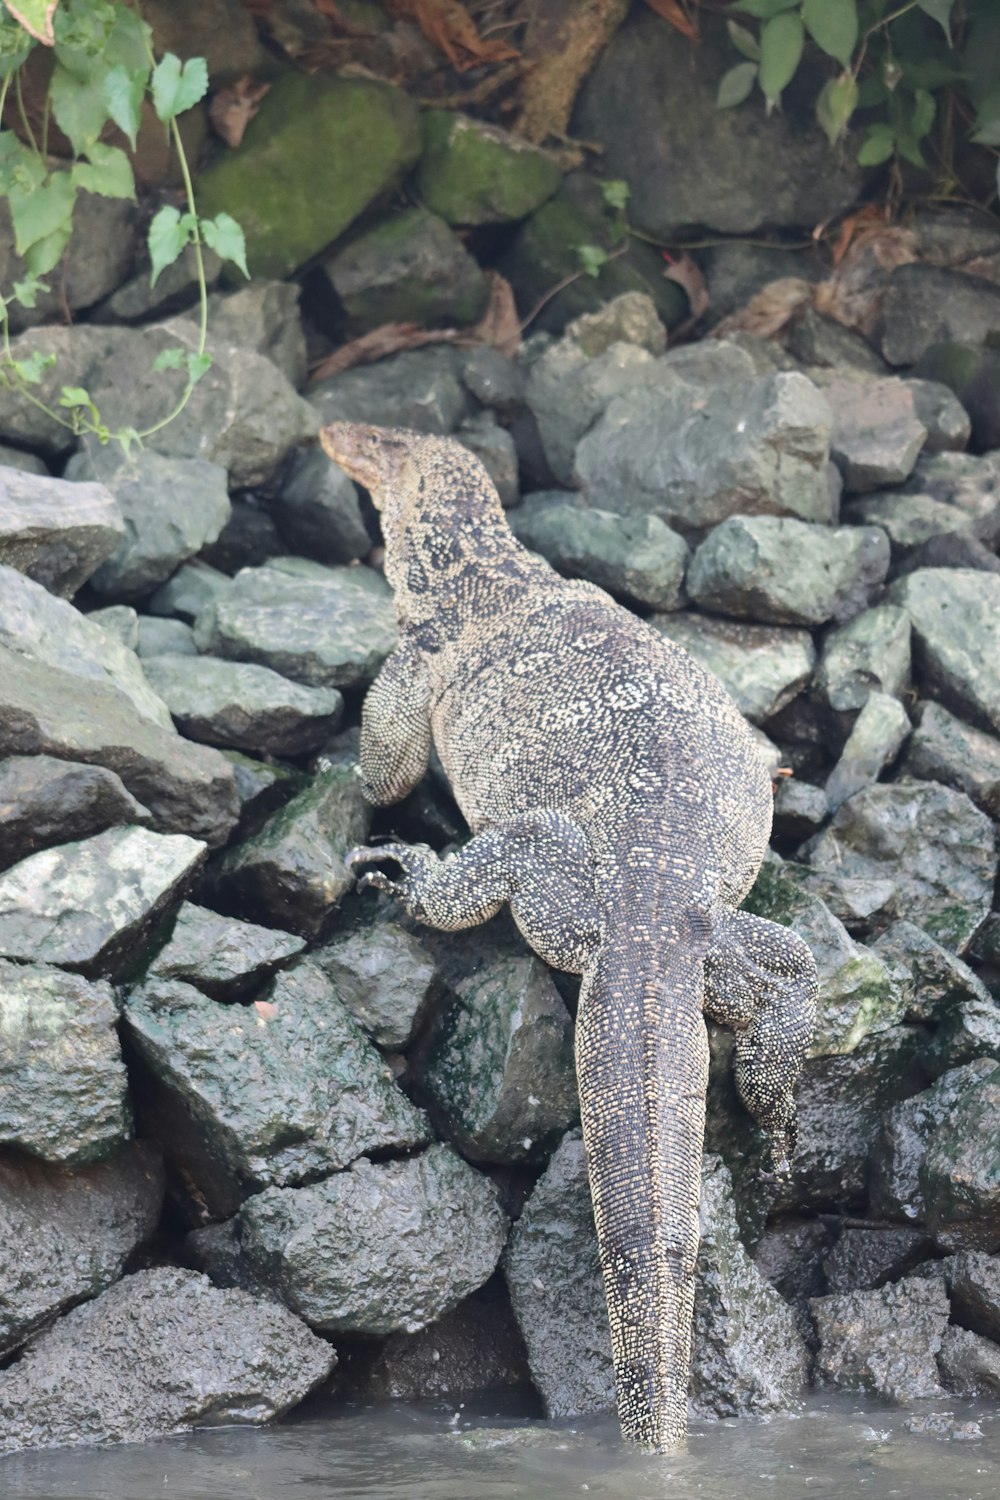 a large lizard standing on top of a pile of rocks